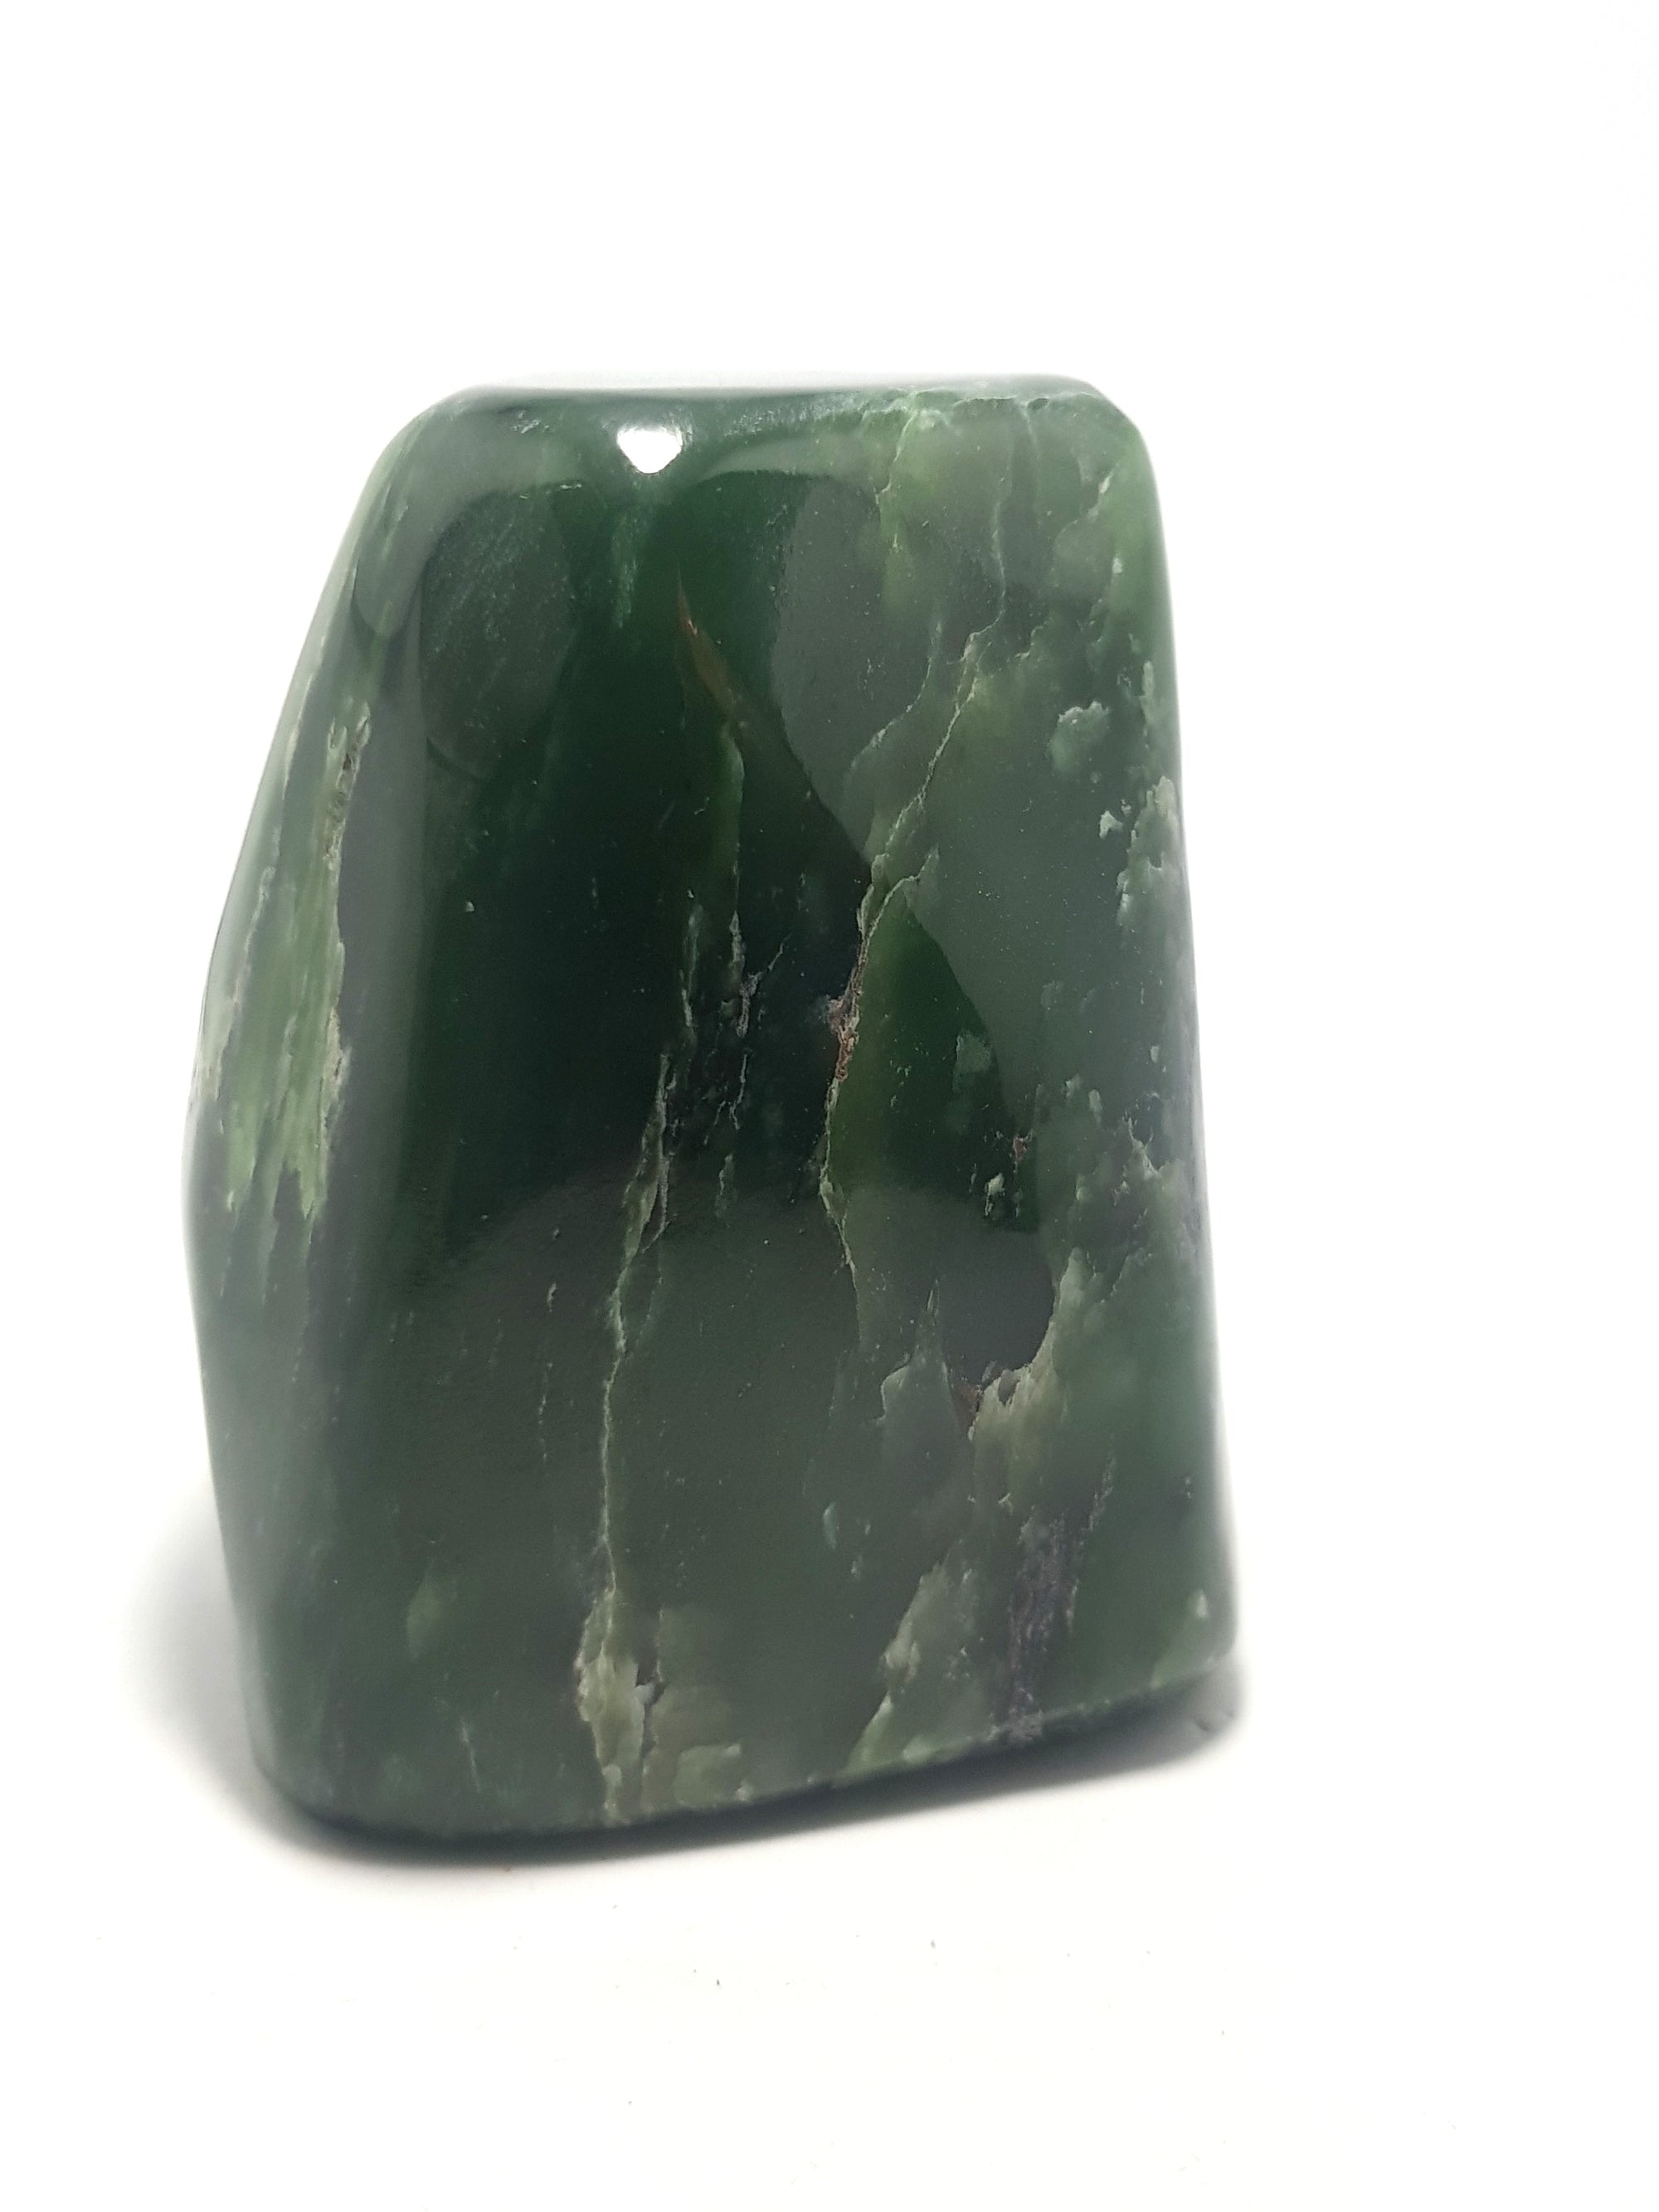 Nephrite jade freeform. Dark green with some white and green patches